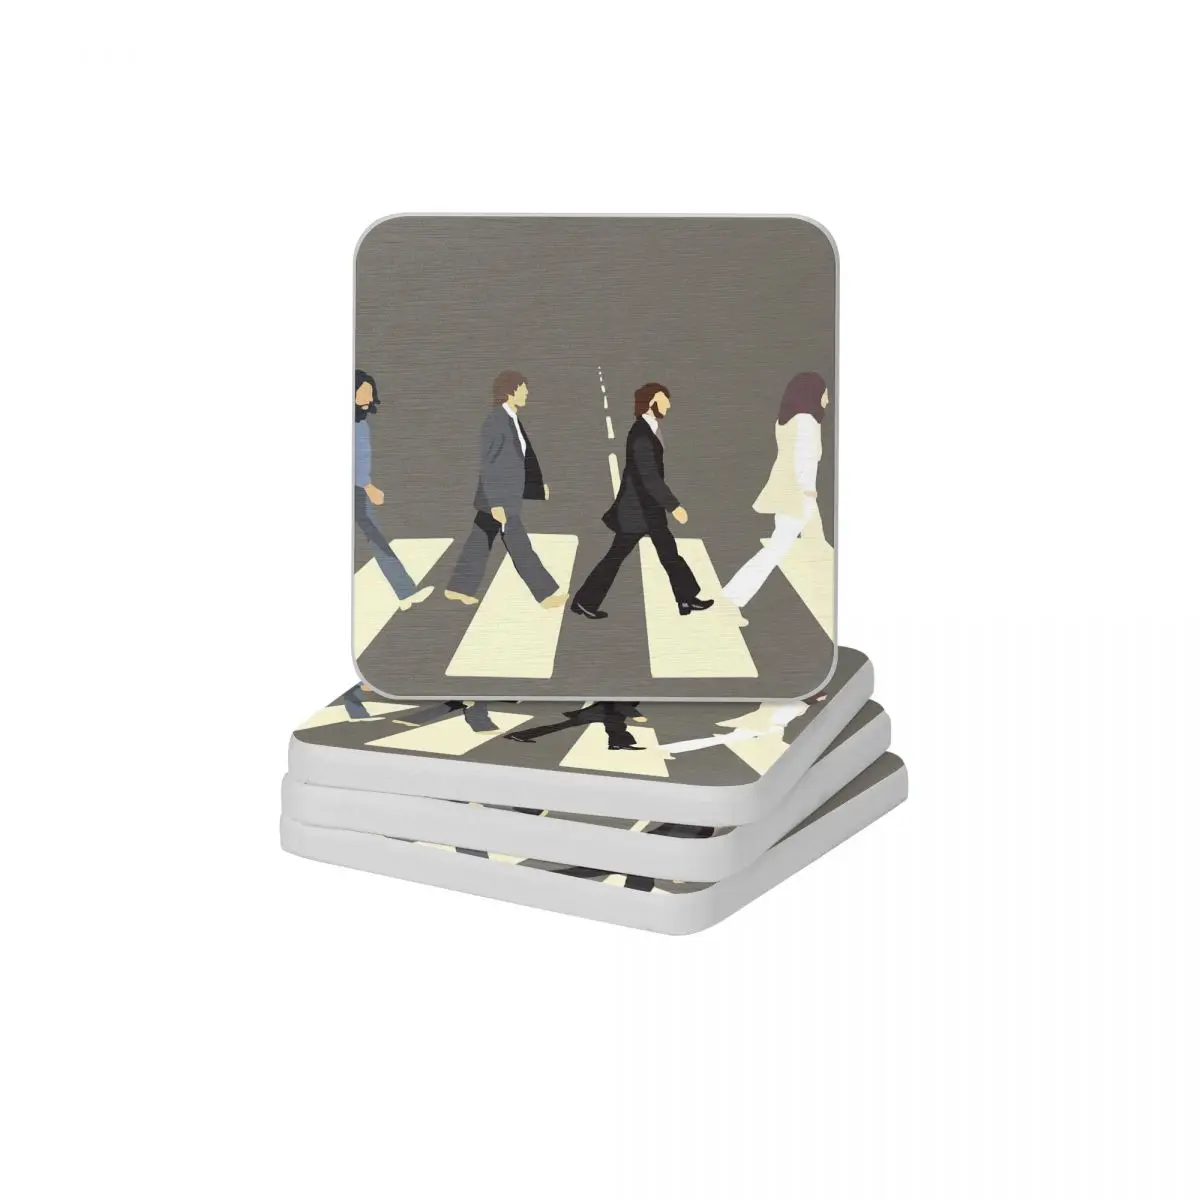 

Abbey Road Diatom Square Round Coaster Water Absorption Cup Bonsai Mat Soap Toothbrush Pad Wholesale Diameter 10cm